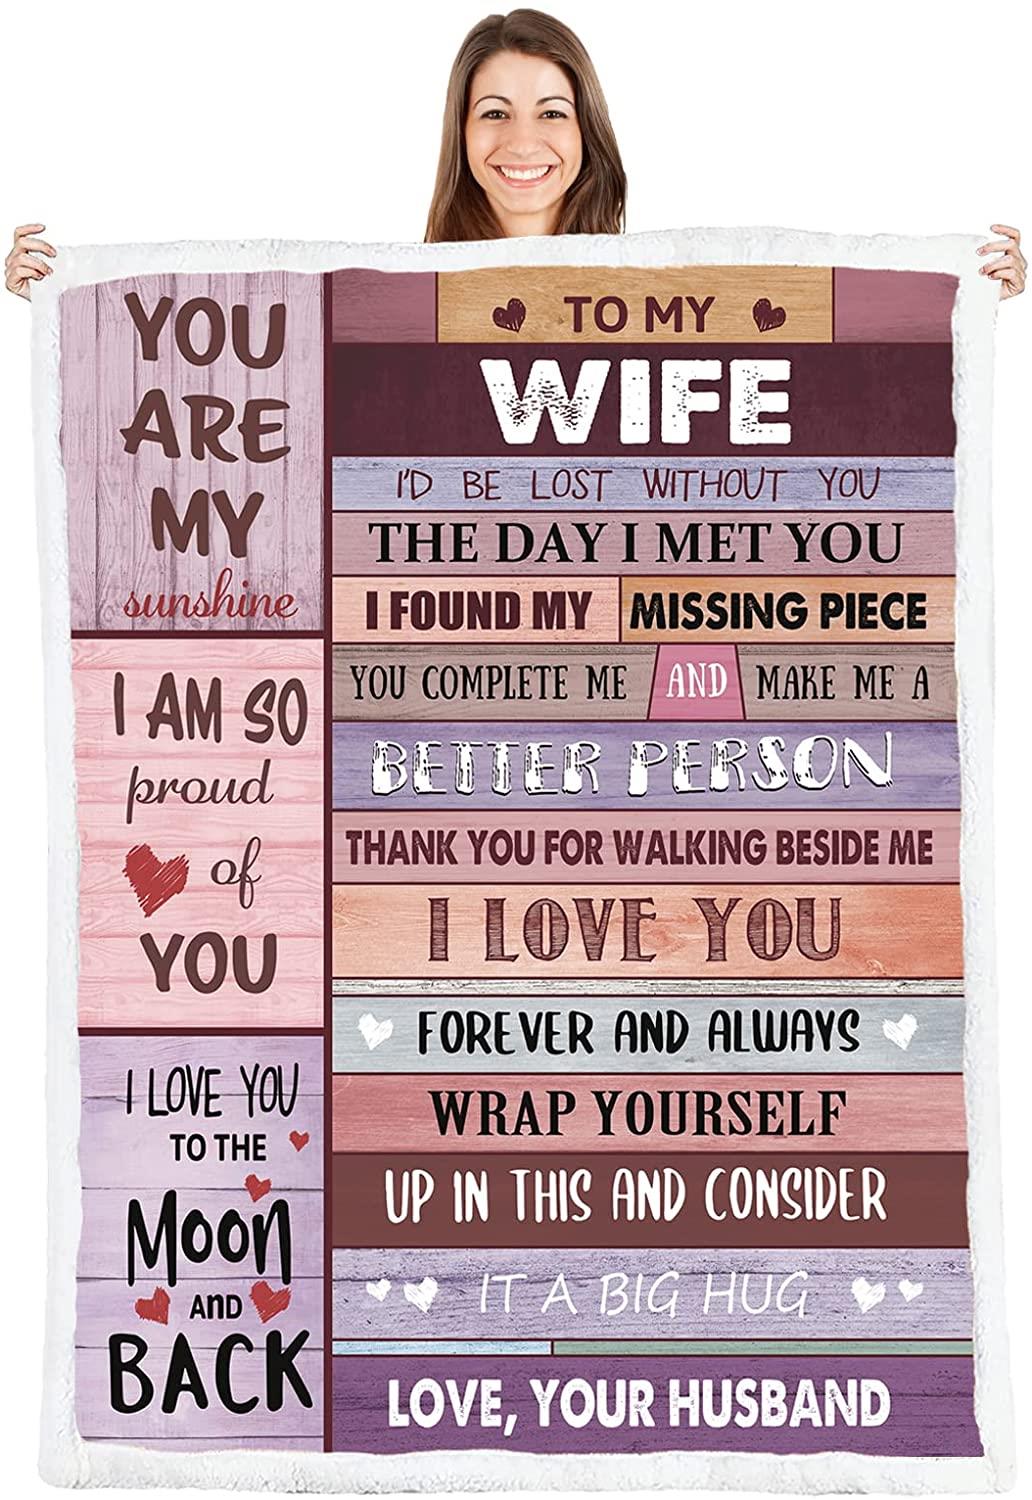 To My Wife Blanket I Love You for Wife Birthday Gifts from Husband Happy for Her Romantic Present Valentines or Mothers Day  Throw